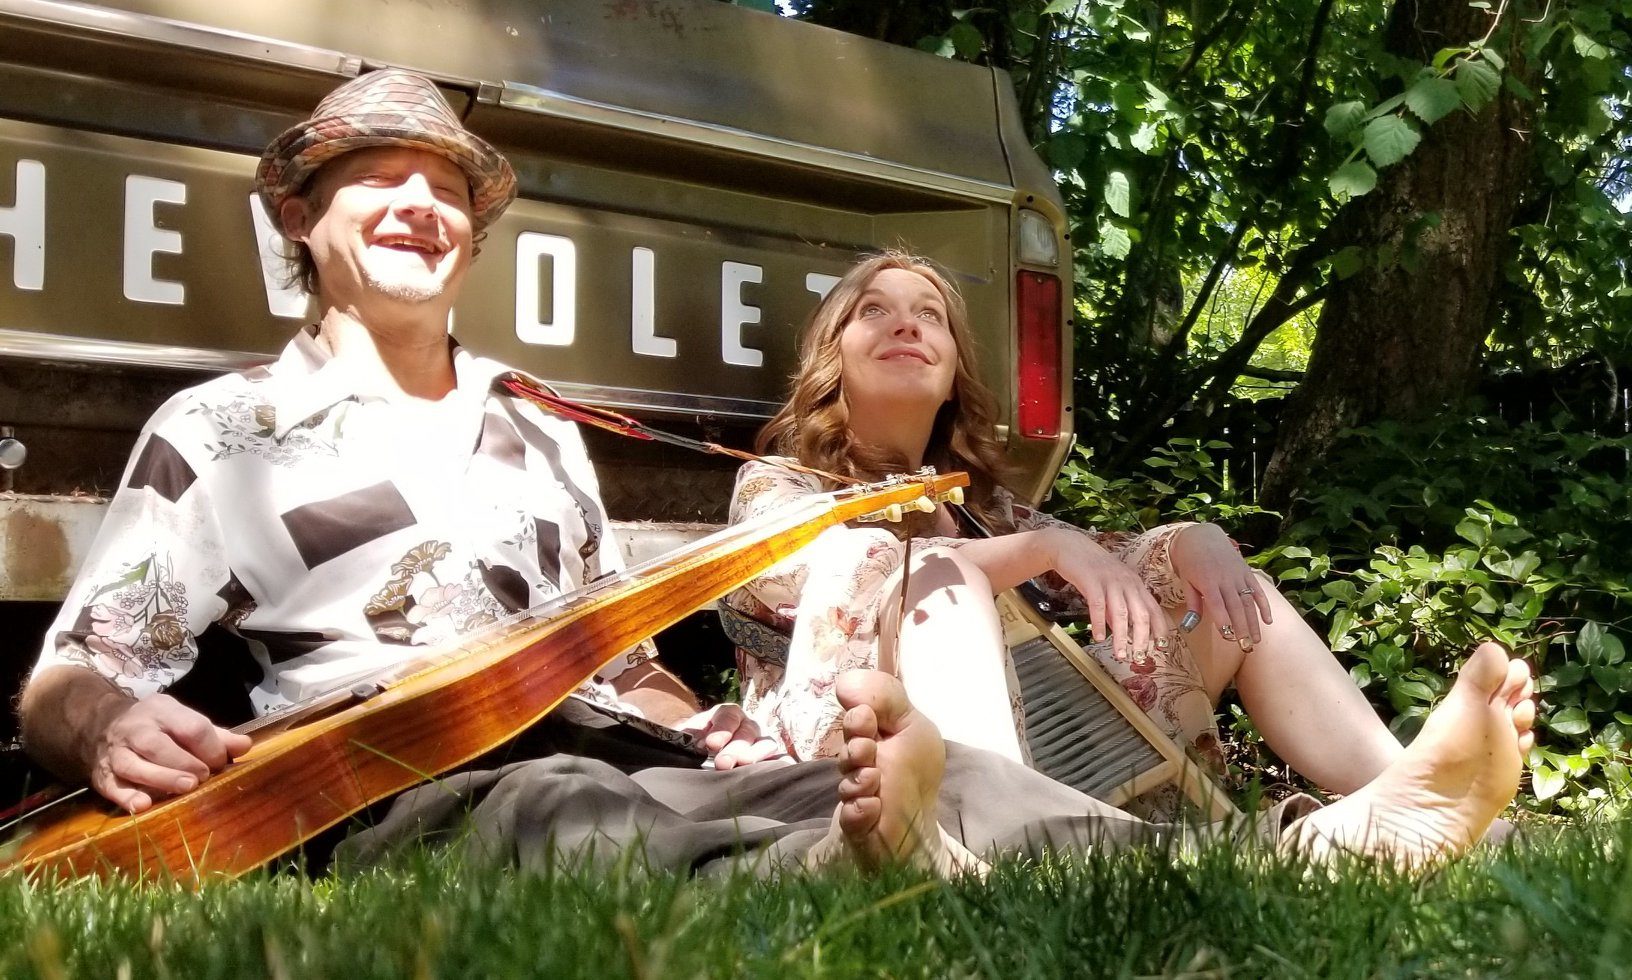 Musicians in Grass with Chevy Truck